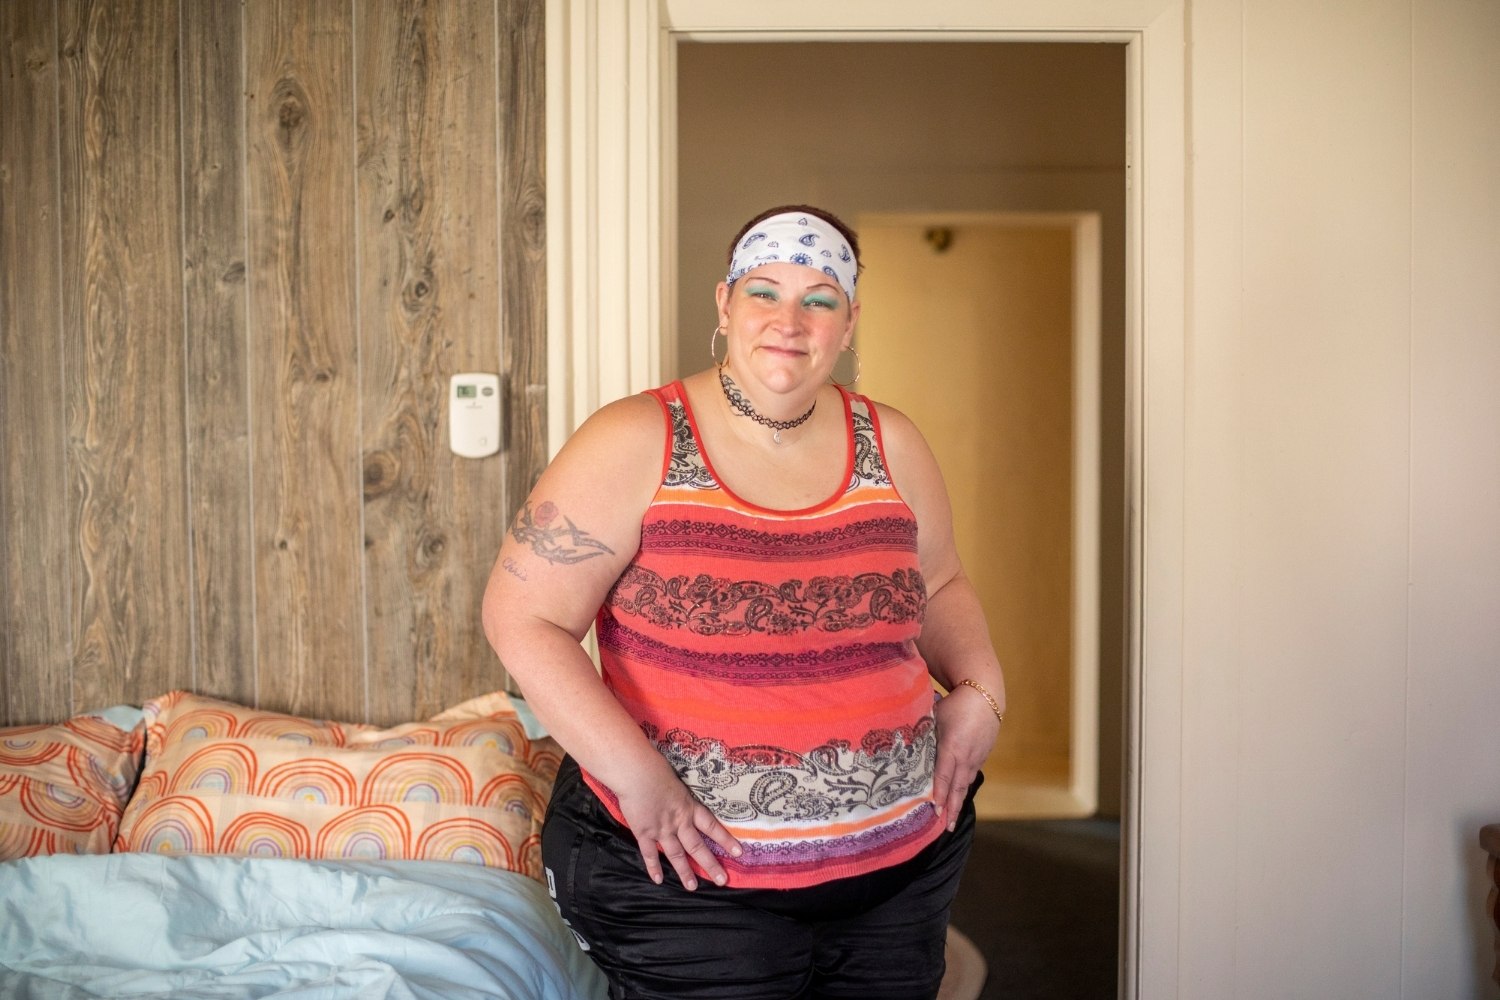 After being homeless for three years, LifePath guest moves into new apartment